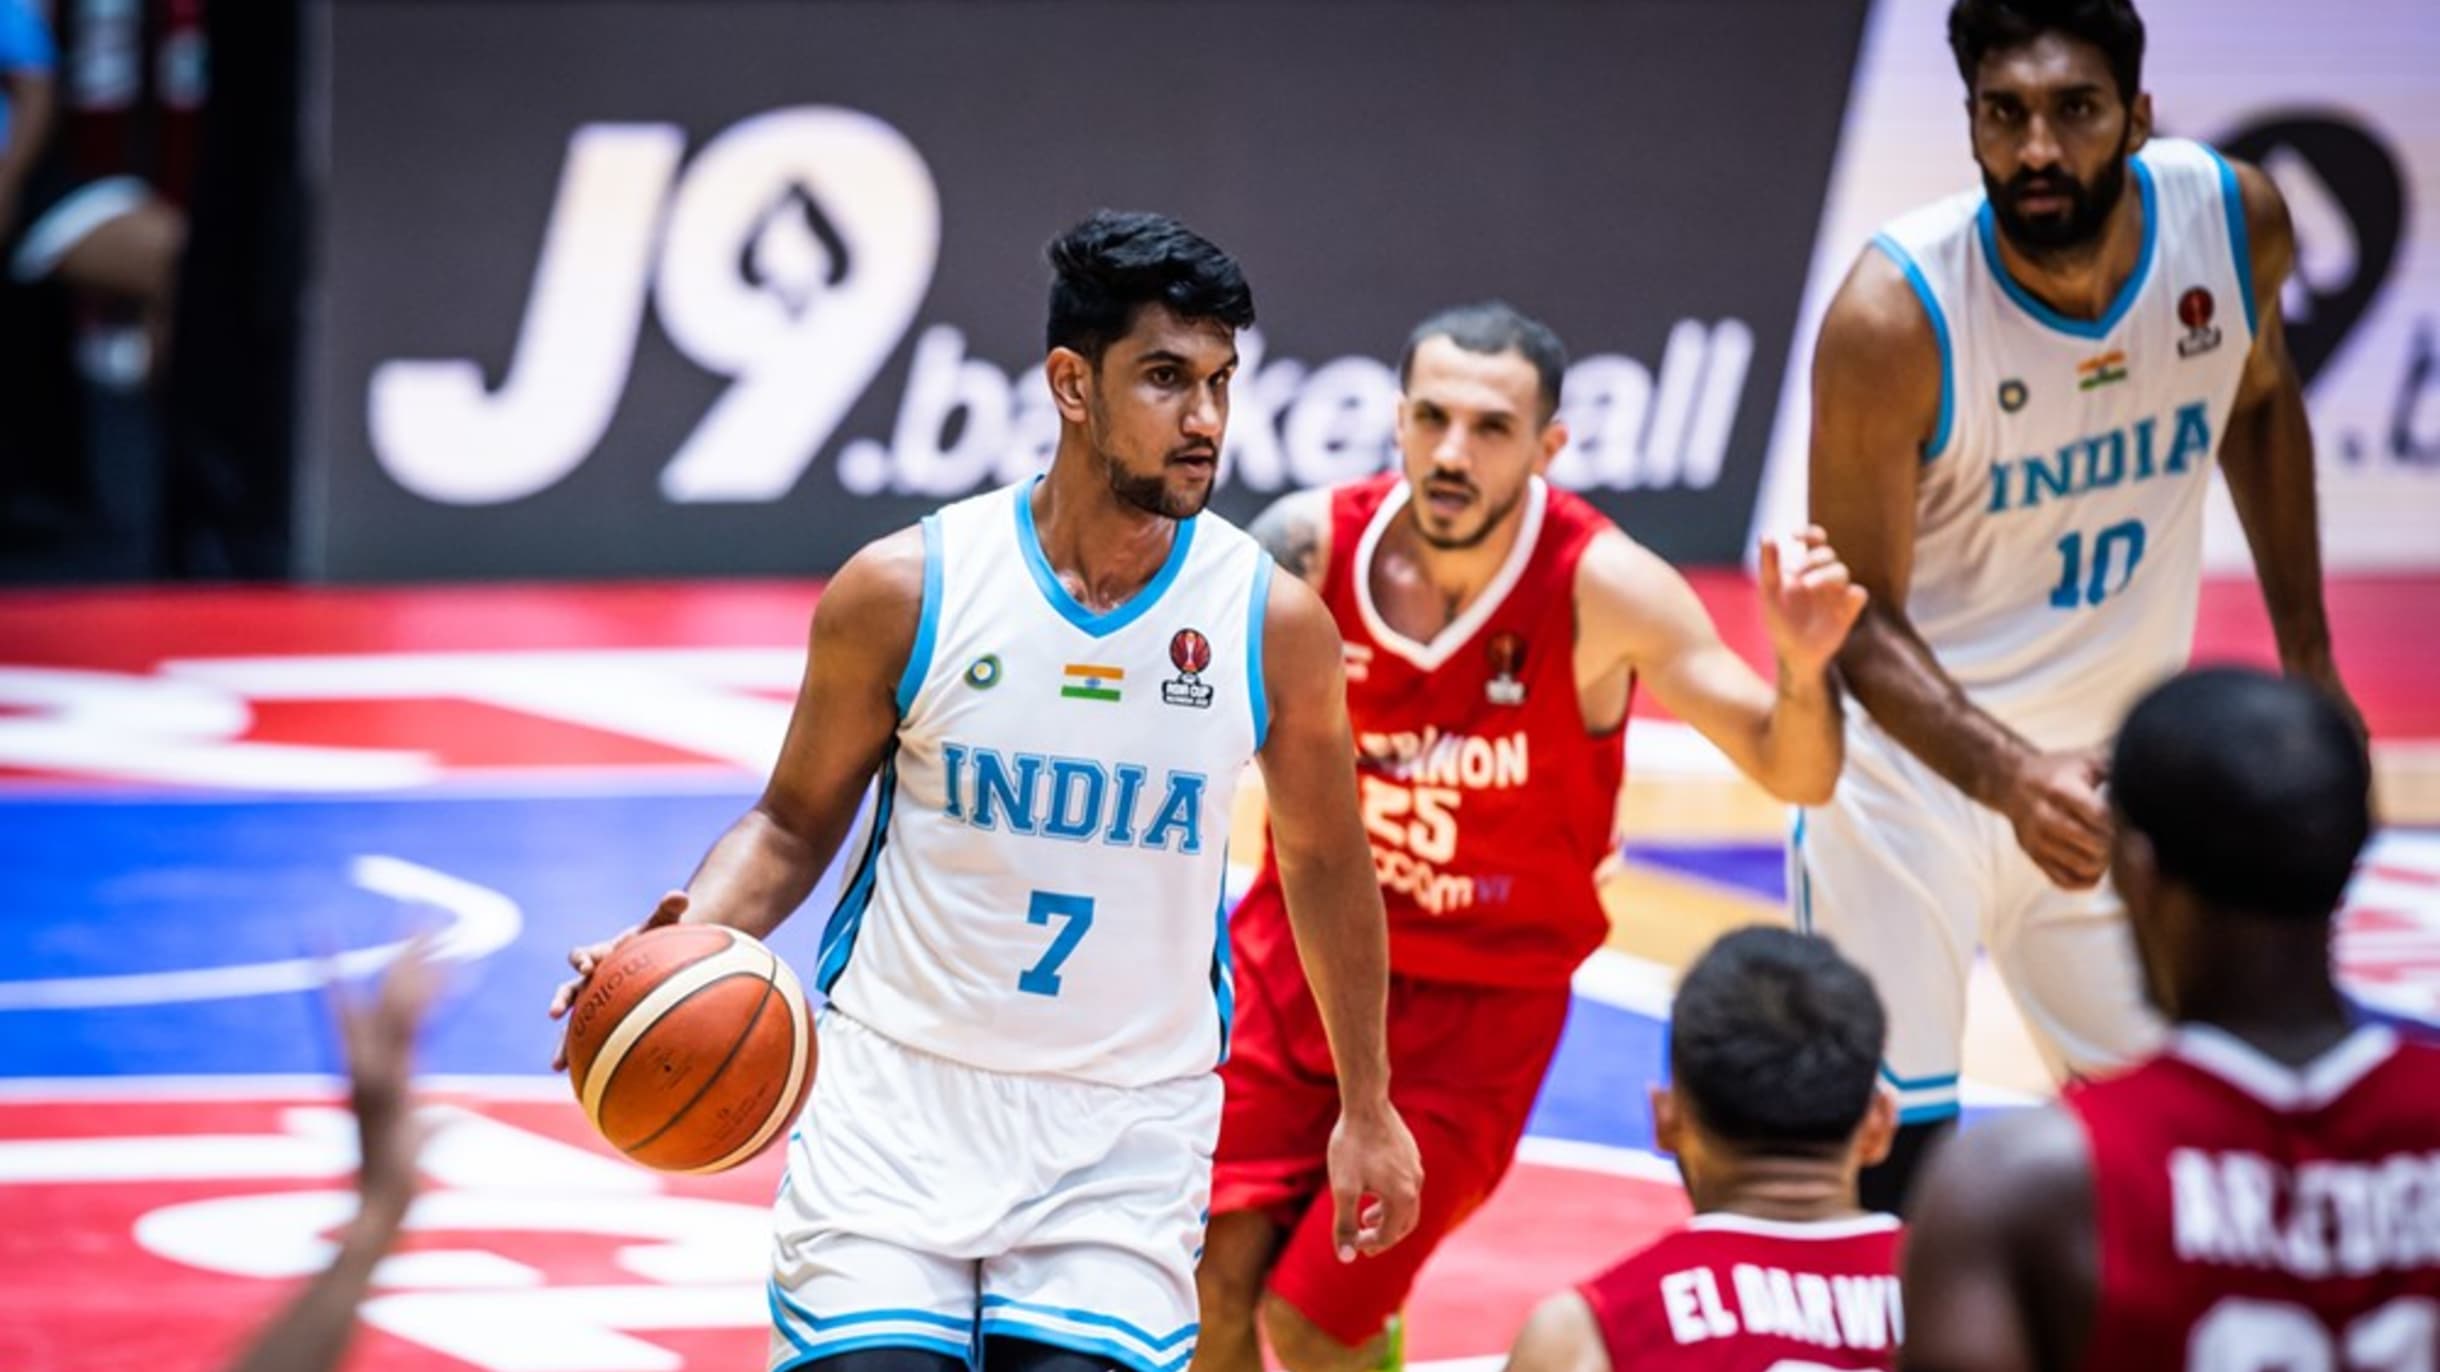 FIBA Asia Cup 2022 India lose 104-63 to Lebanon in final Group D match